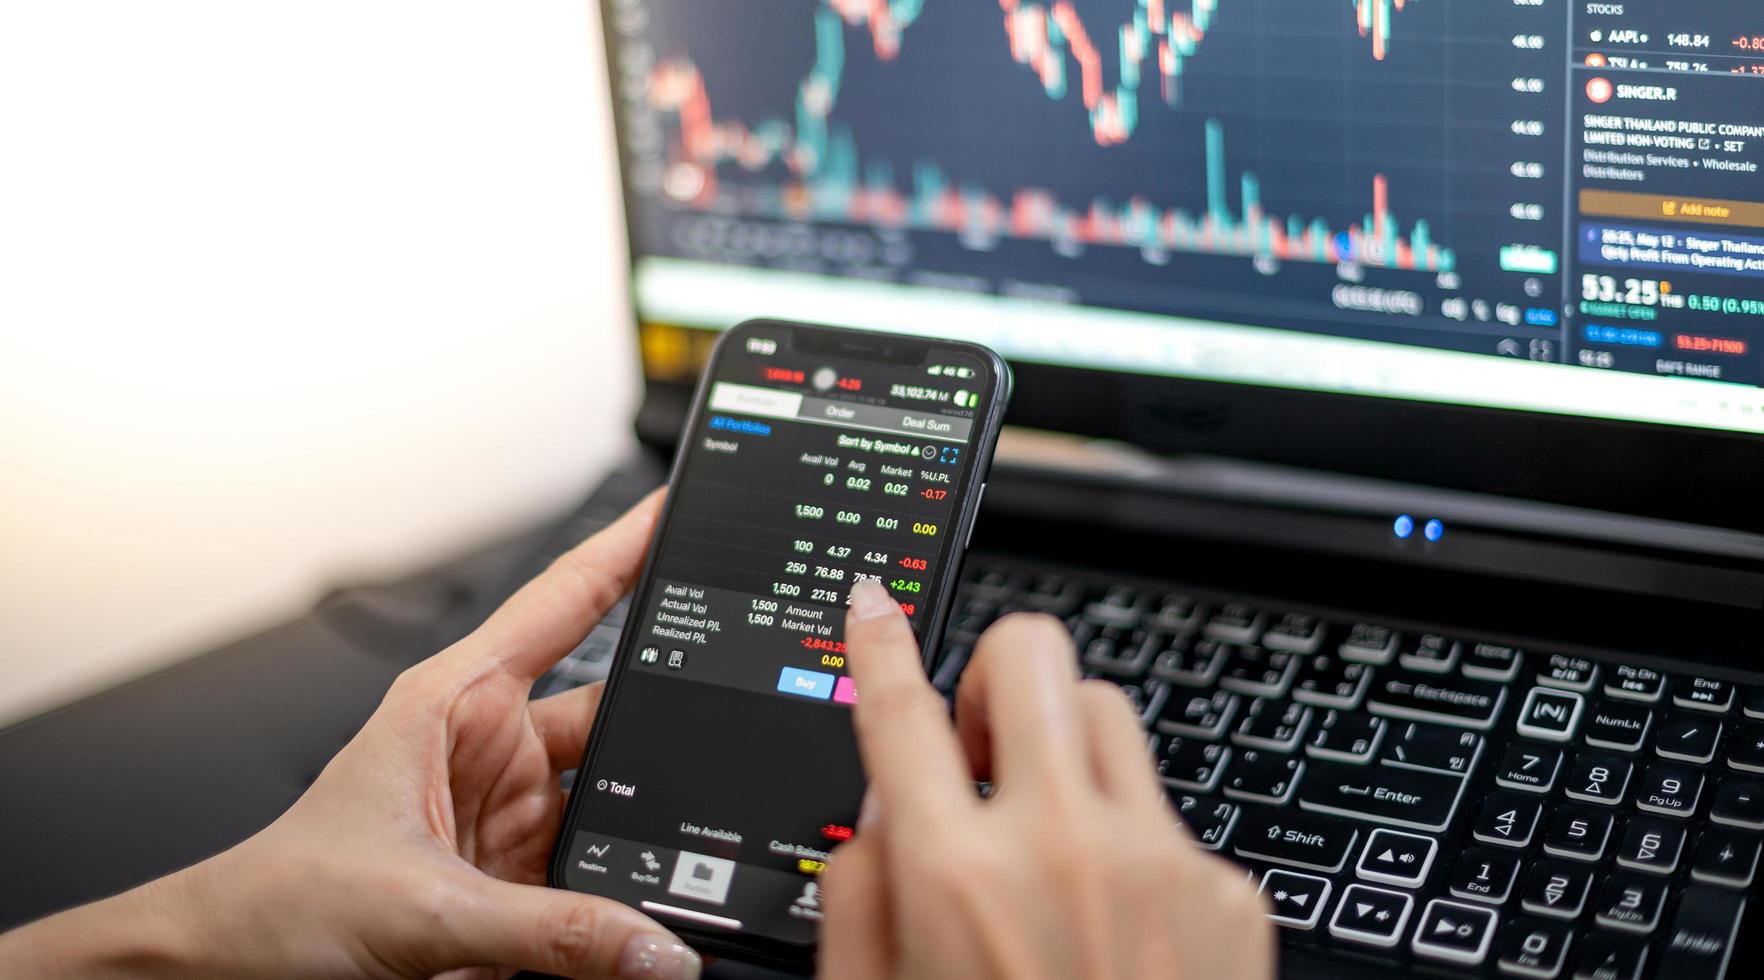 Female trader investor broker analyst holding a smartphone in hand analyzing stock market trading charts indexes data checking price using mobile stock market exchange application. photo